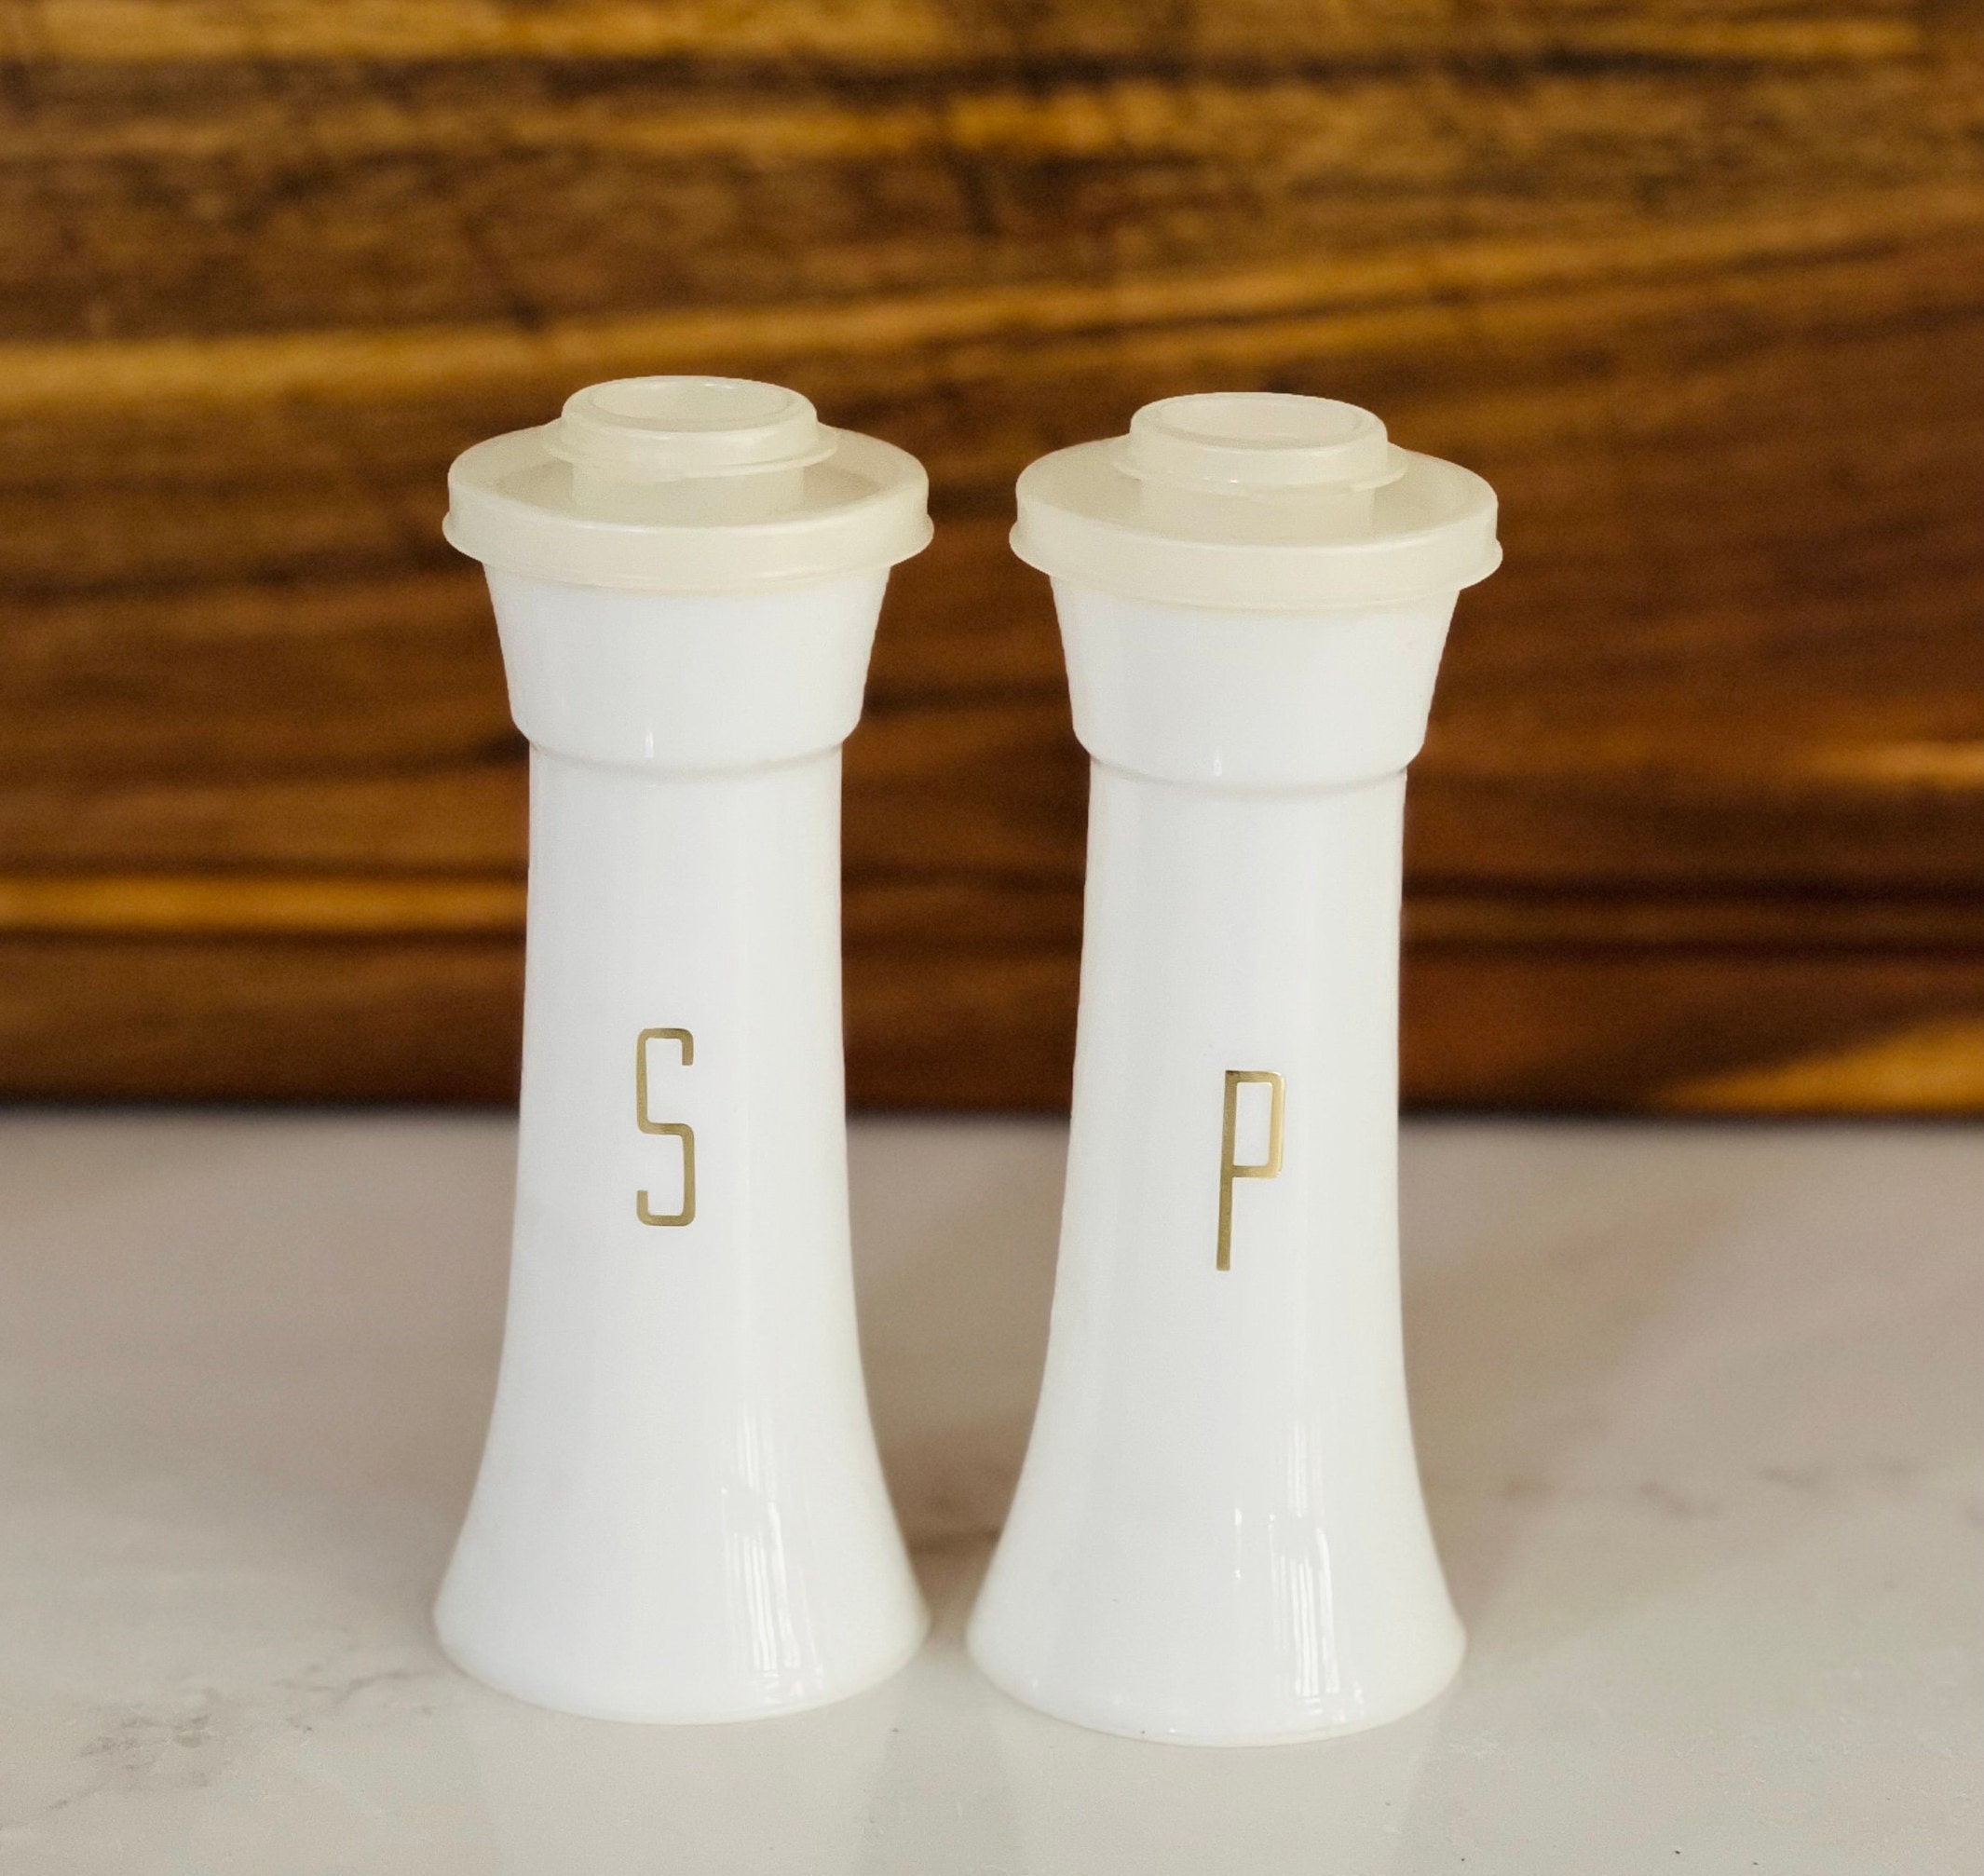  Tupperware Hourglass Salt And Pepper Shaker Lids Large Size:  Home & Kitchen